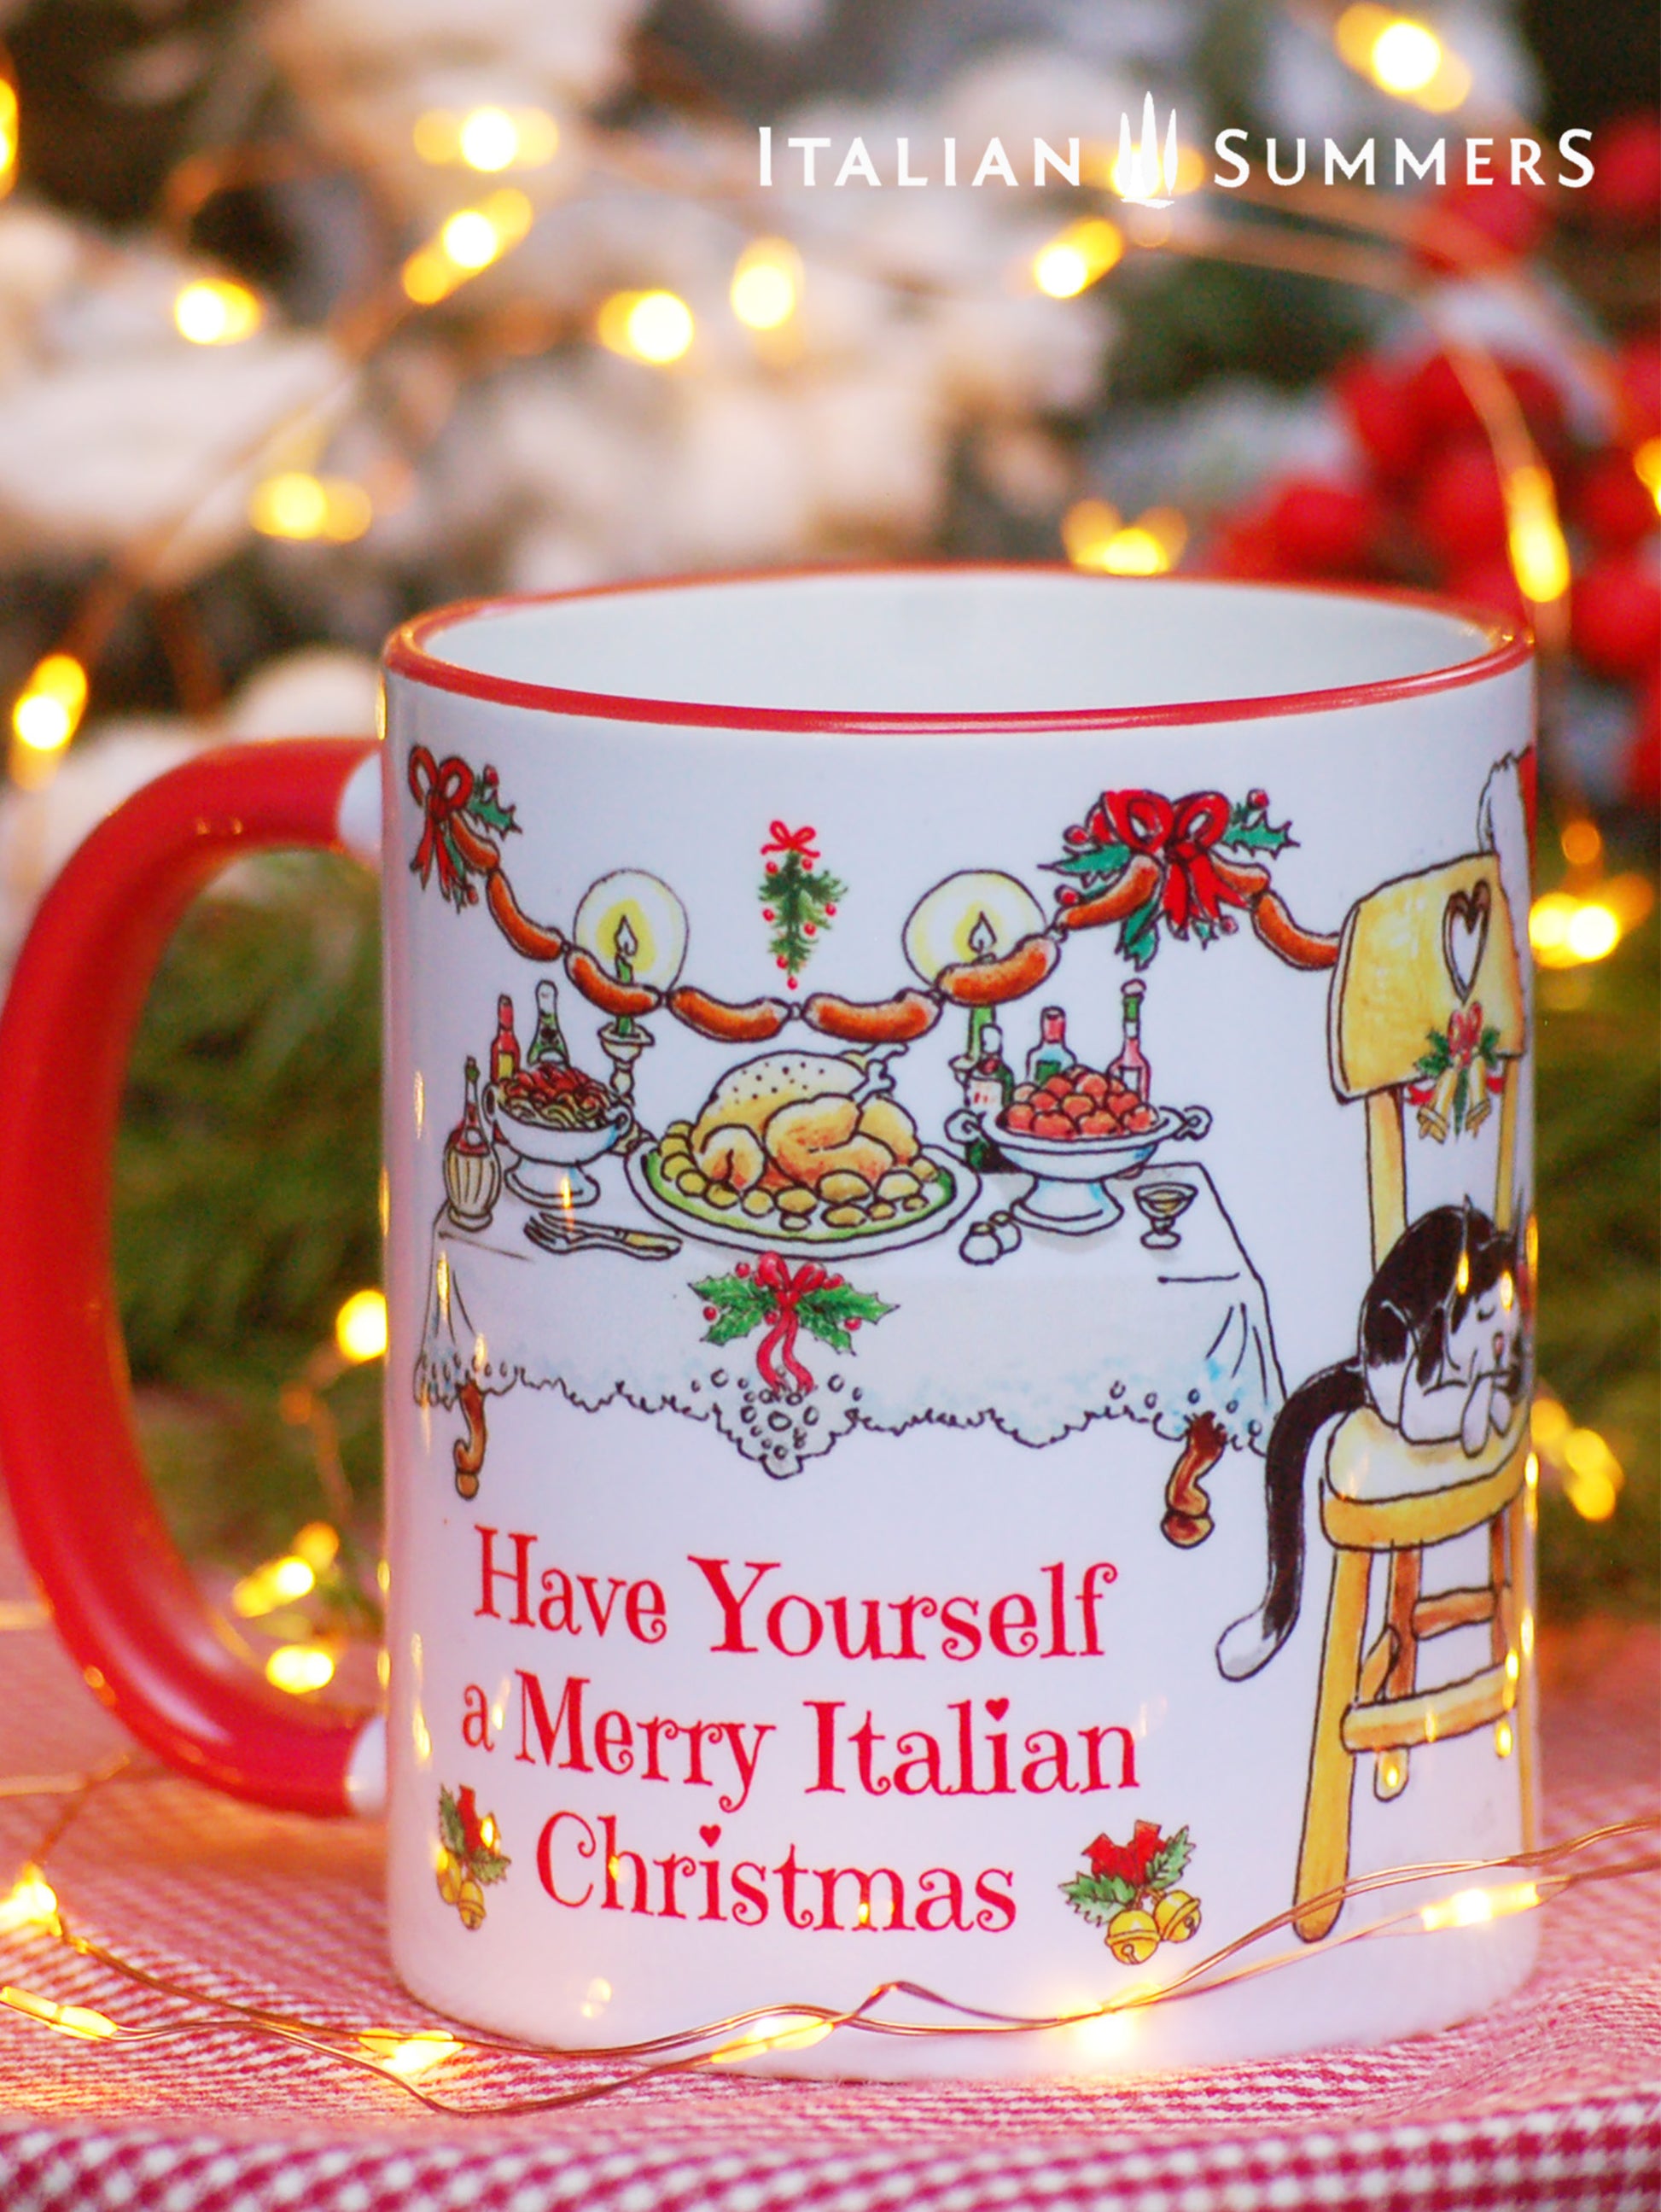 This Italian Christmas mug is a sight to see! Deck the halls with mugs and joy... this one comes complete with sketches of a sleeping cat plus three mice, merrily walking away with goodies from the table. It's sure to bring a smile to your face this holiday season!